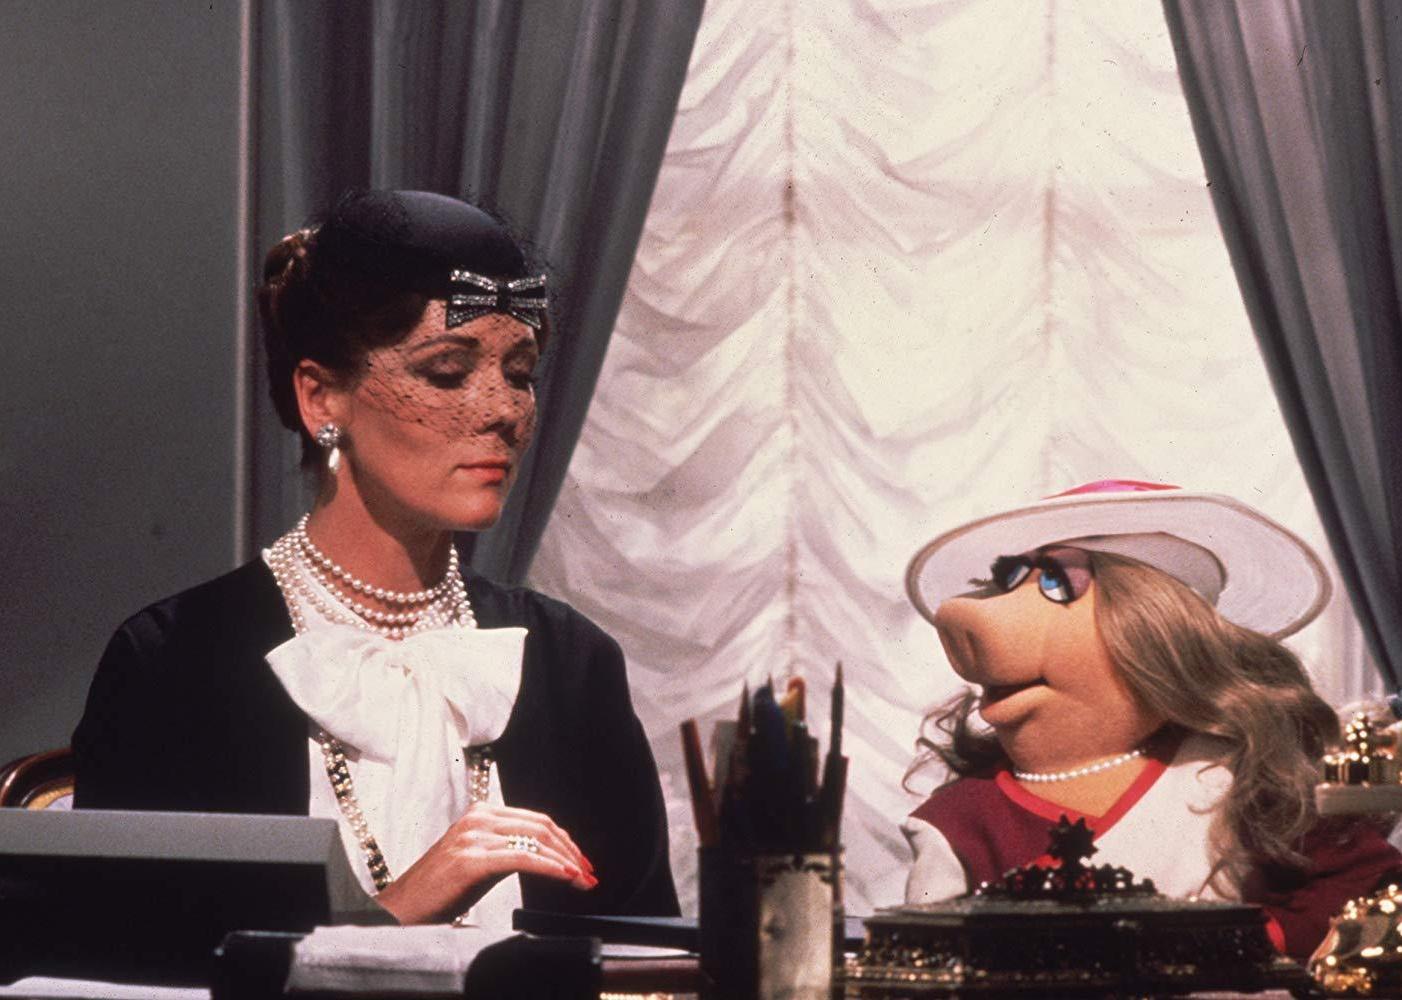 A woman in black and white dress sits at a desk with Miss Piggy the muppet.